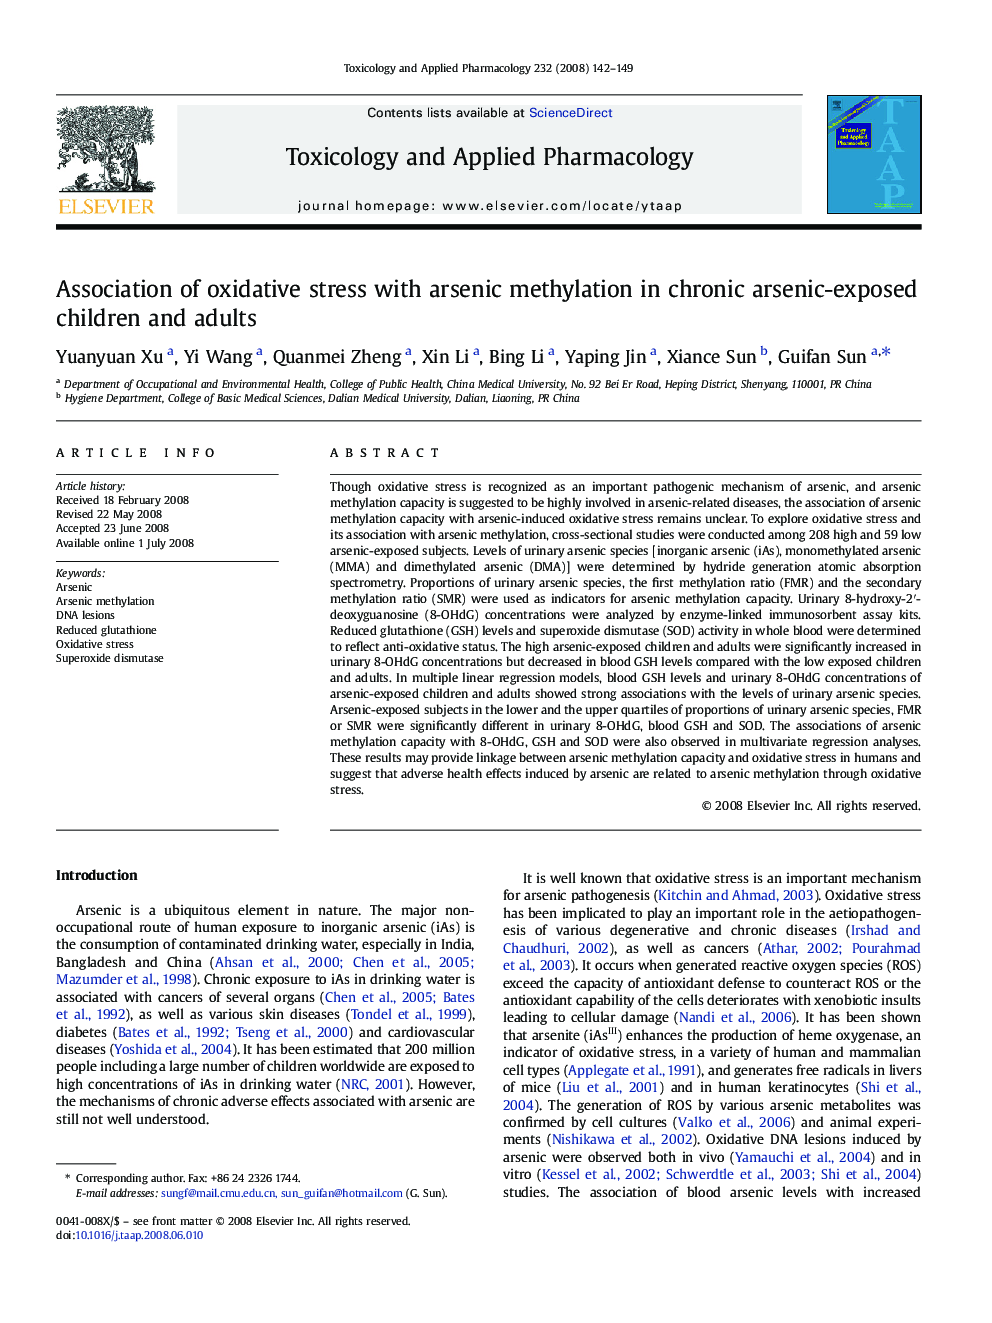 Association of oxidative stress with arsenic methylation in chronic arsenic-exposed children and adults